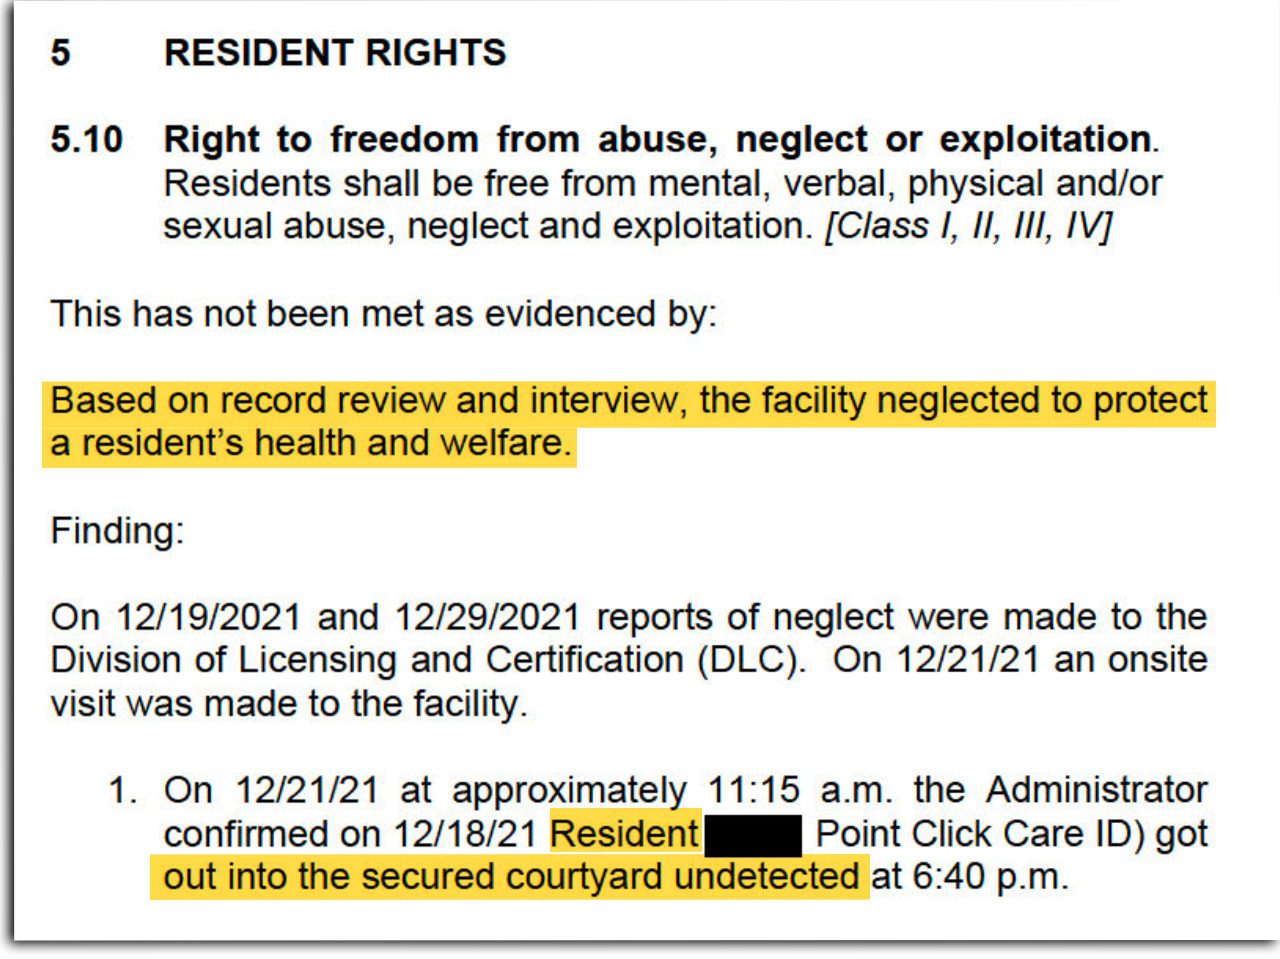 A Maine DHHS report about the incident notes the facility neglected to protect a resident's health and welfare. The resident got out into the secured courtyard undetected, according to the report.